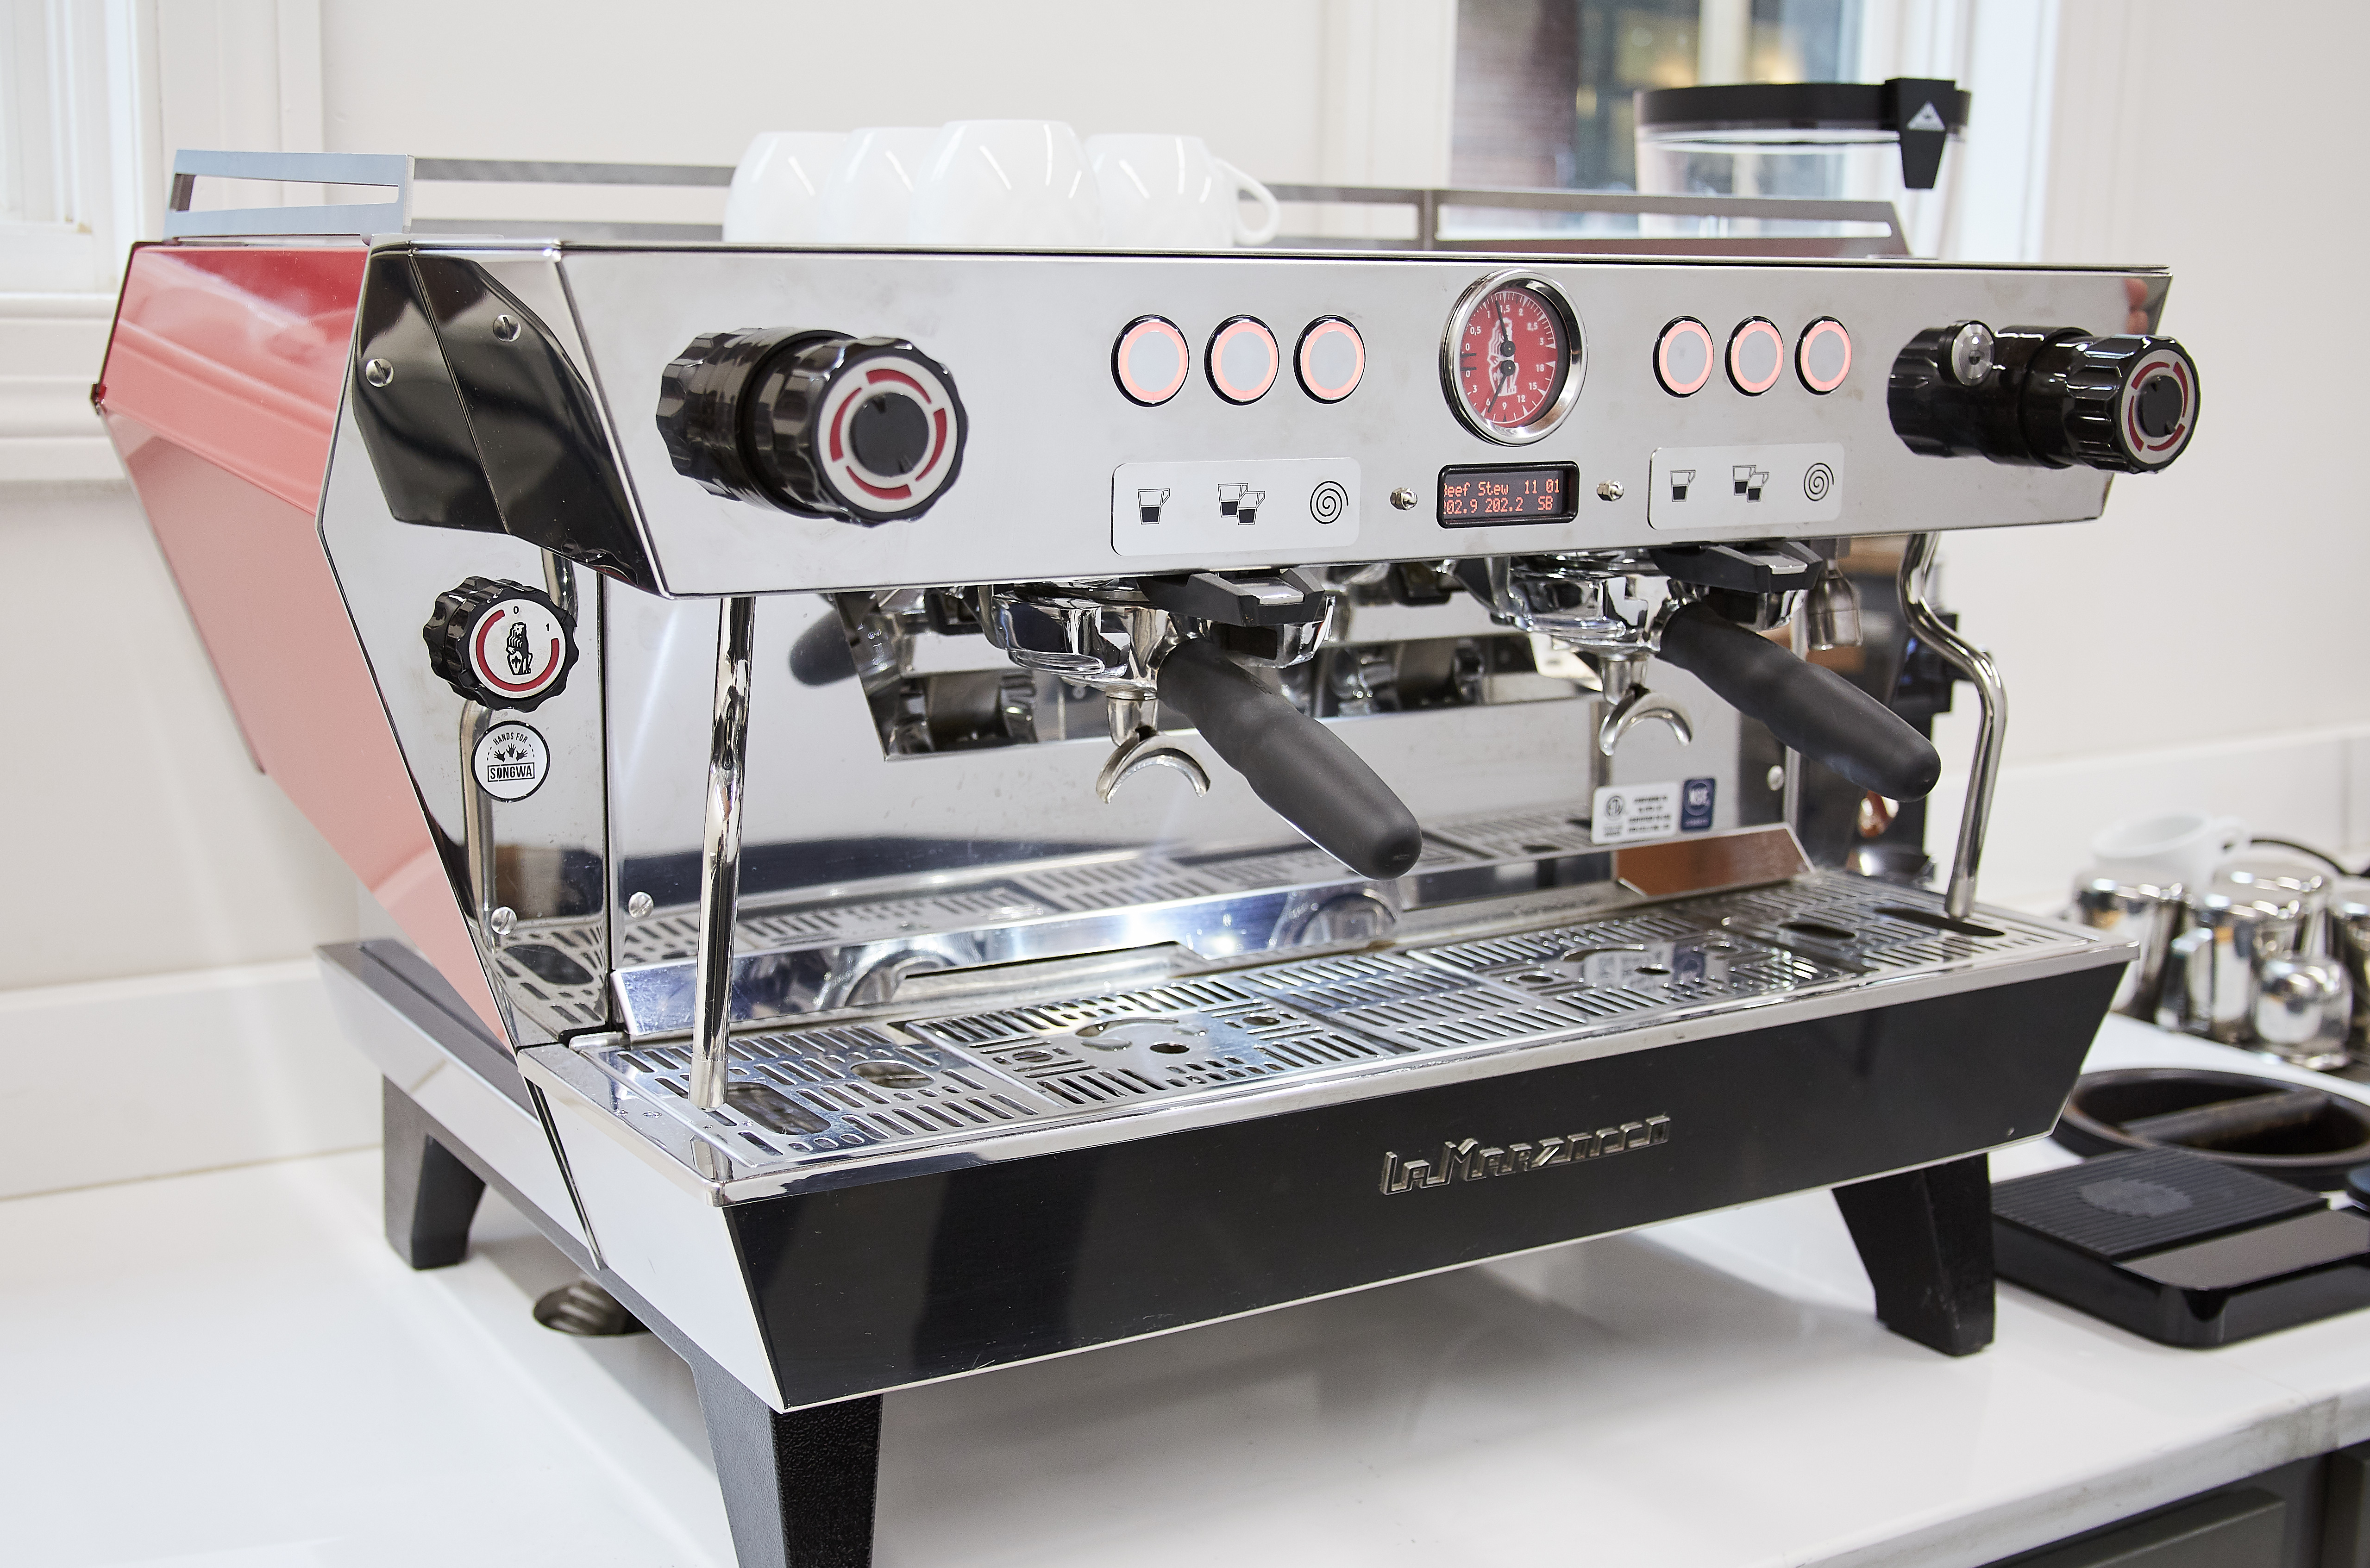 https://cdn11.bigcommerce.com/s-6h7ychjk4/product_images/uploaded_images/lamarzocco-kb90-creative-10.jpg